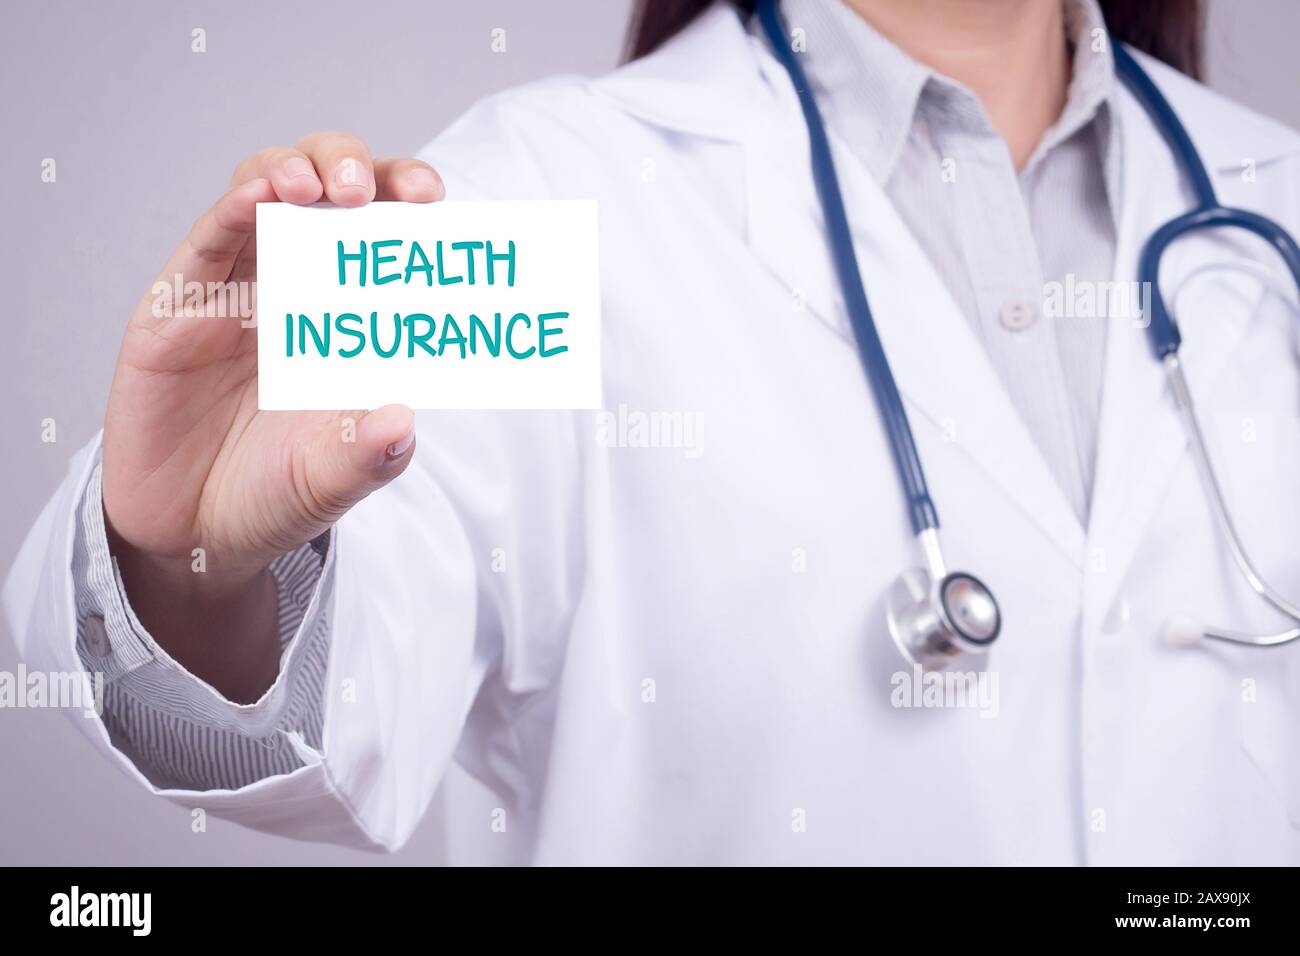 health insurance concept. doctor in medical clothing with stethoscope showing card for health insurance in hand, anonymous face Stock Photo